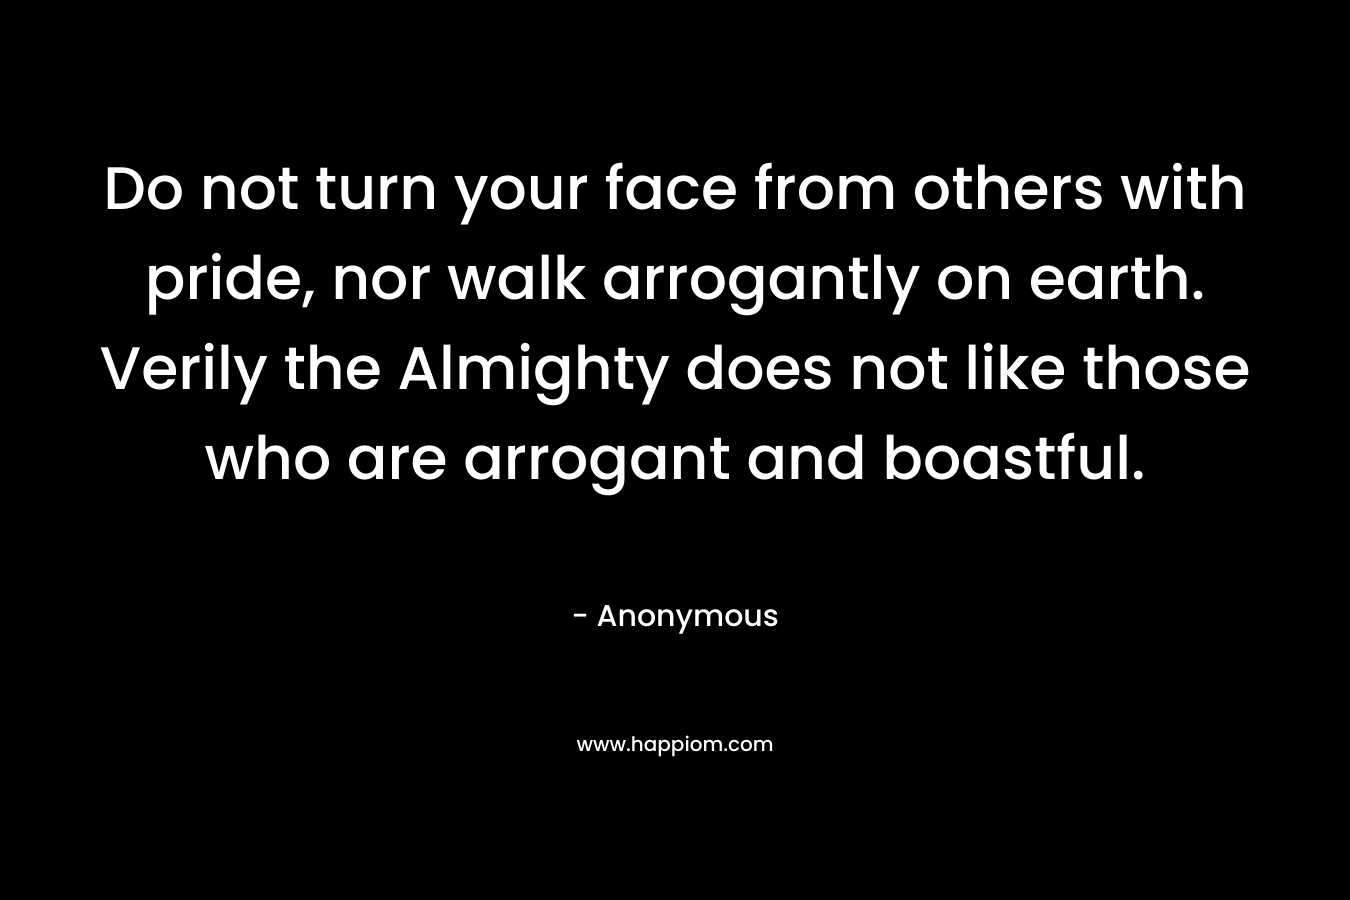 Do not turn your face from others with pride, nor walk arrogantly on earth. Verily the Almighty does not like those who are arrogant and boastful.